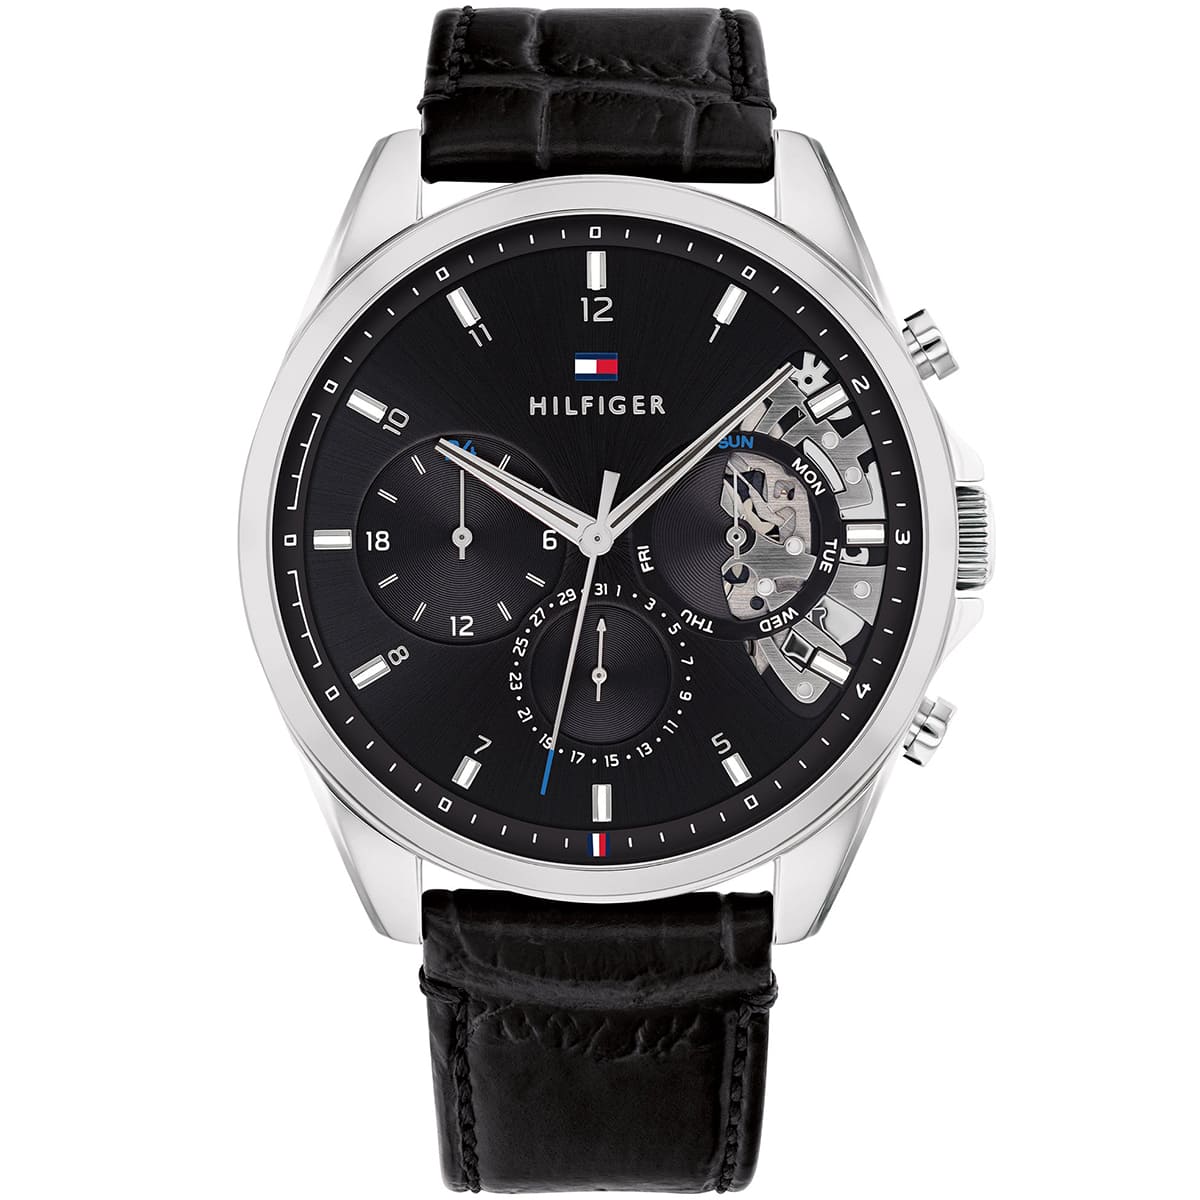 1710449-tommy-hilfiger-watch-men-black-dial-leather-strap-quartz-battery-analog-monthly-weekly-date-baker